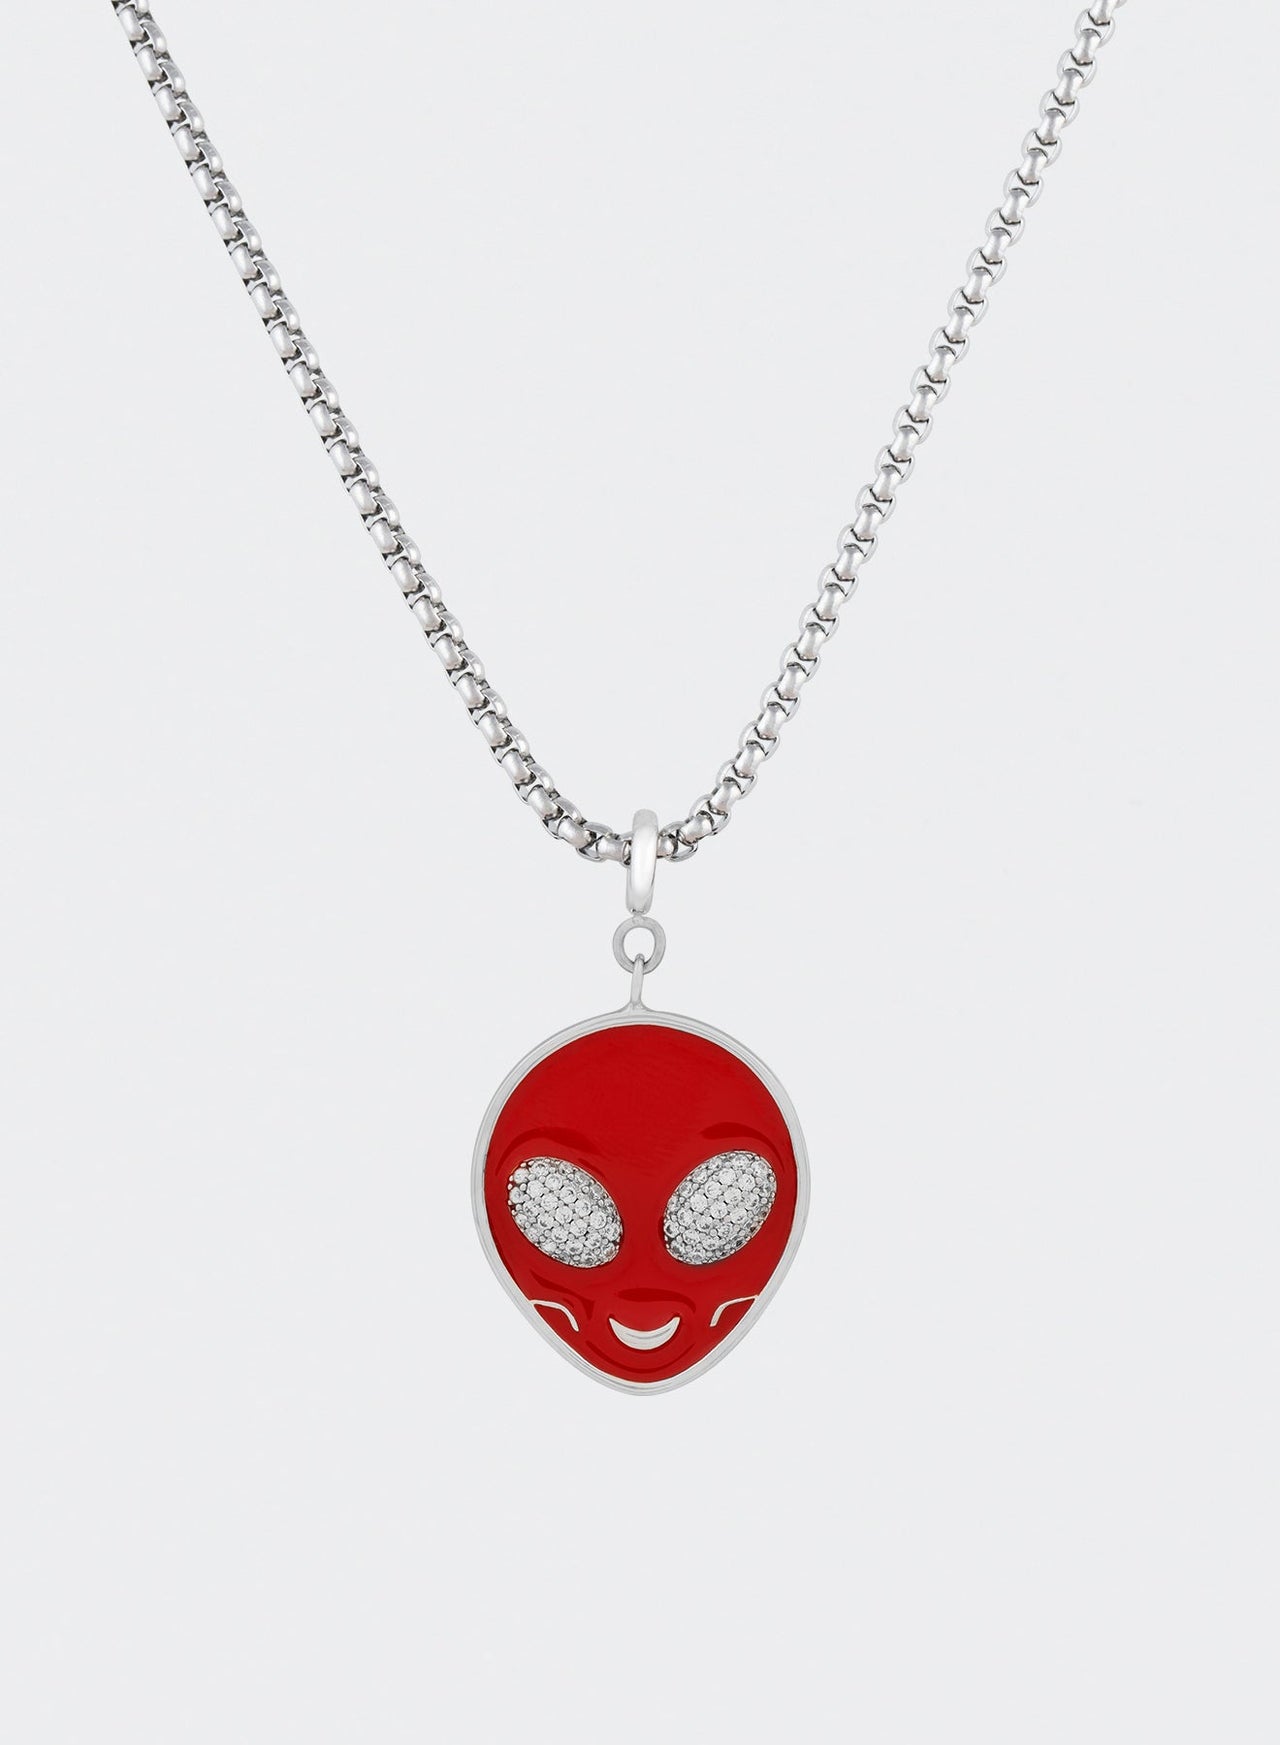 18k white gold coated alien pendant necklace with hand-set micropavé stones in white on red hand painted glow in the dark alien pendant and 3mm rolo chain